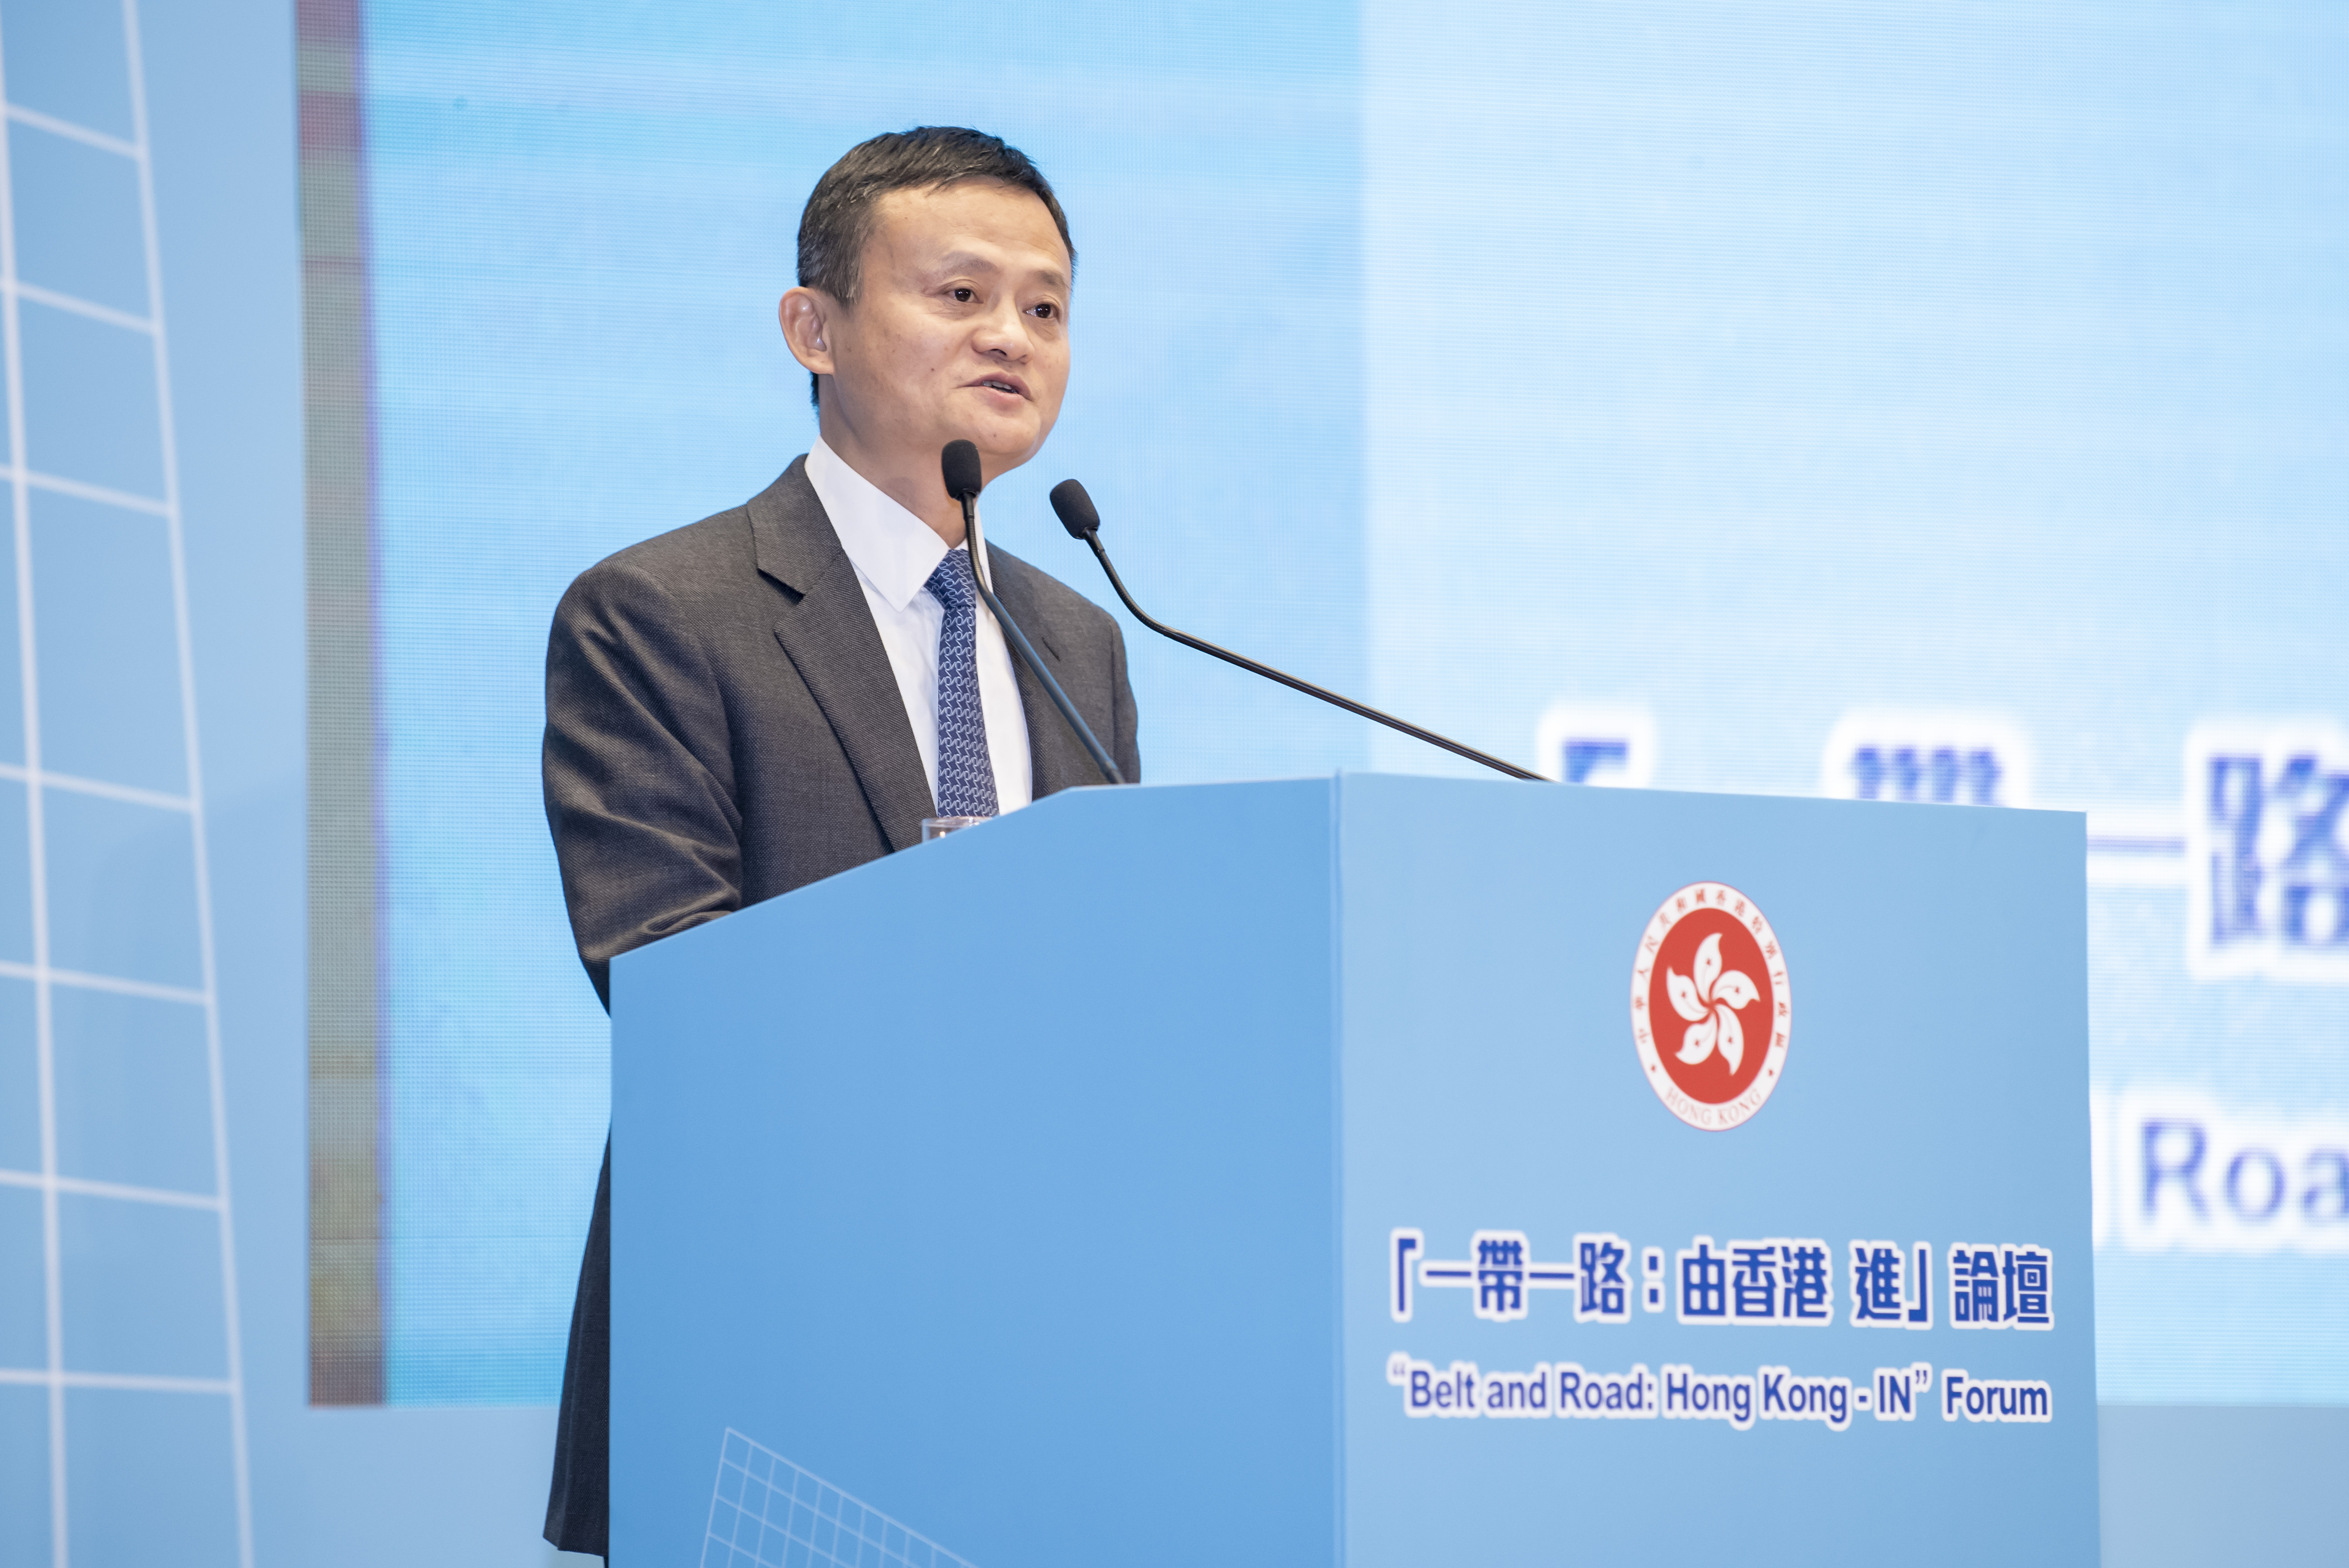 Mr Jack Ma, the Executive Chairman of the Alibaba Group, delivered a speech at the Forum from the perspective of private enterprises on leveraging Hong Kong’s advantages in professional services and expertise to serve as the launch-pad into the Belt and Road markets.